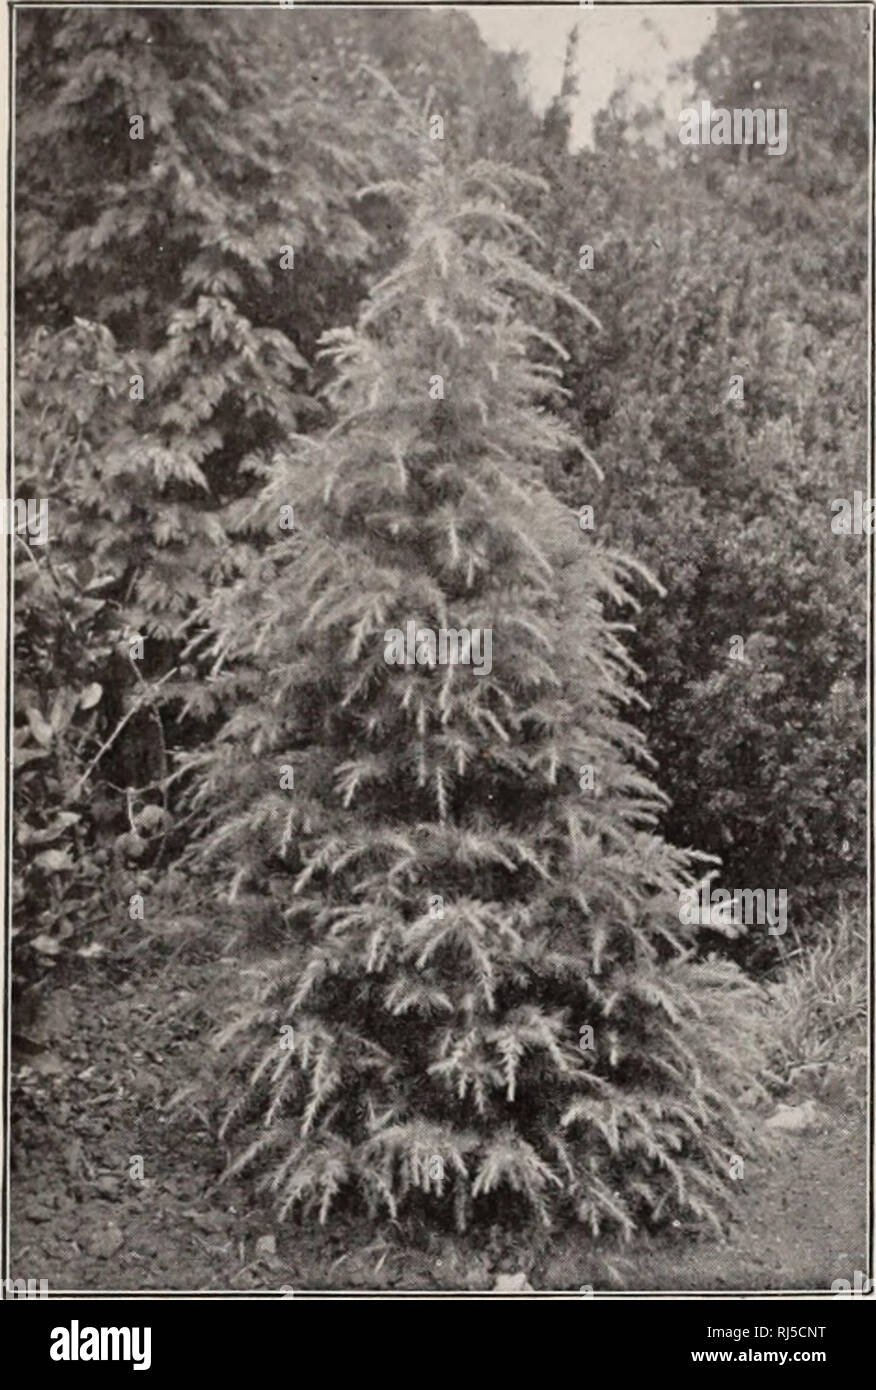 . Choice hardy trees and plants / F.W. Kelsey Nursery Company.. Nursery Catalogue. 22 FRKDKRICK W. KELSEY.. CEDRI S DEODe)KA. INDIAN CEDAR. BIOTA semper aurescens. Ever-Golden Ar- KOR-ViT.^: (IV). Den.se conical habit. 75 cts. CEDRUS Atlantica. Mr. Atlas Cedar (I). Of vigorous growth, pyramidal form; dense, light silvery foliage, very thick on the upper side of the branches. Hardy and valuable. One of the finest evergreens. $1 to $2. Extra speci- mens, $5 to $20. CEDRUS Atlantica glauca. (I). One of the most beautiful evergreens. Upright growth, low branched and of compact habit. Leaves very f Stock Photo